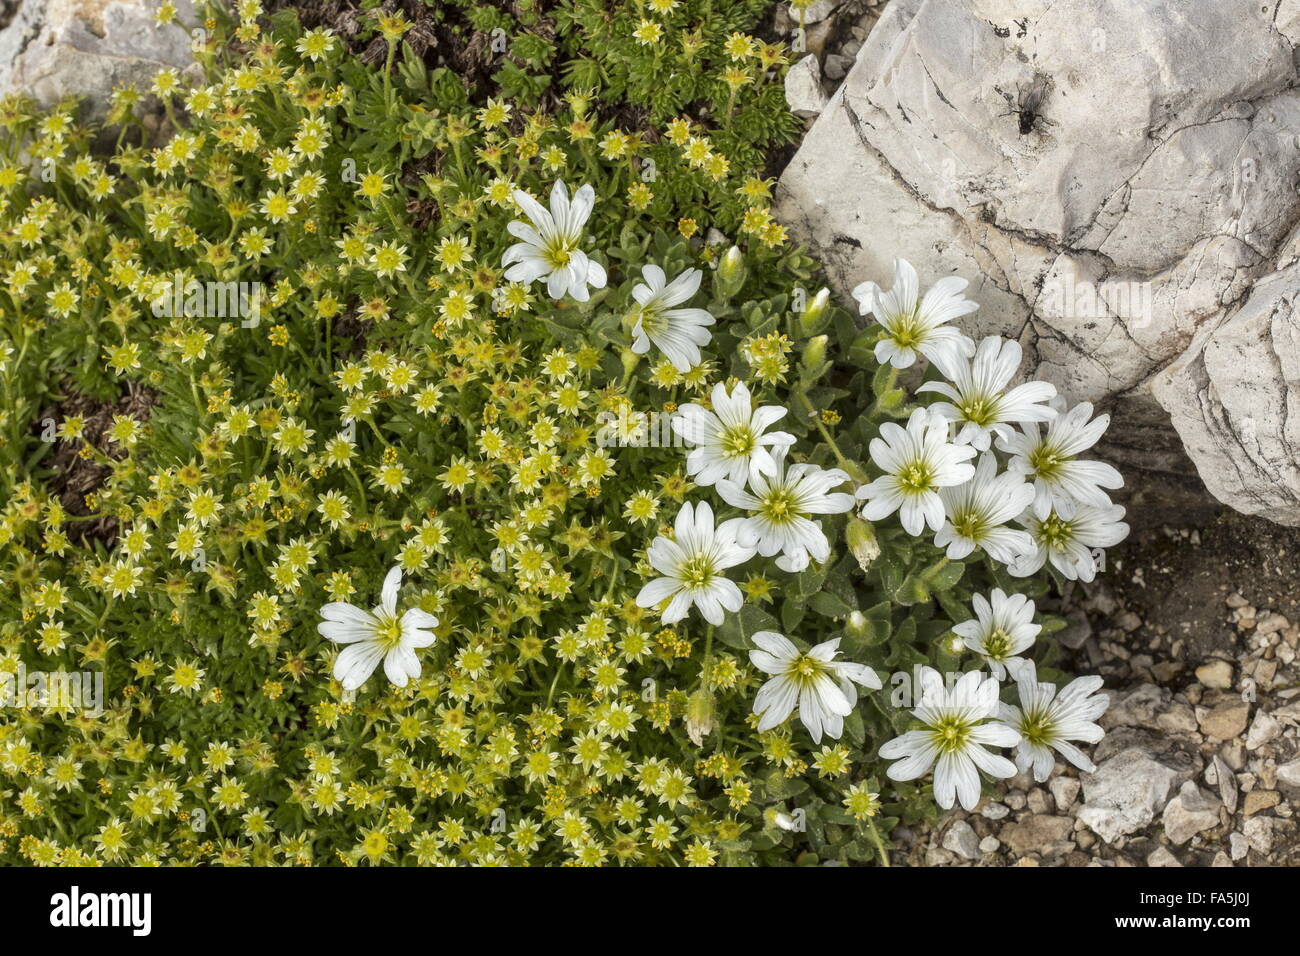 Musky saxifrage, Saxifraga exarata ssp moschata and Glacier mouse-ear, Cerastium uniflorum in flower in the Dolomites. Stock Photo